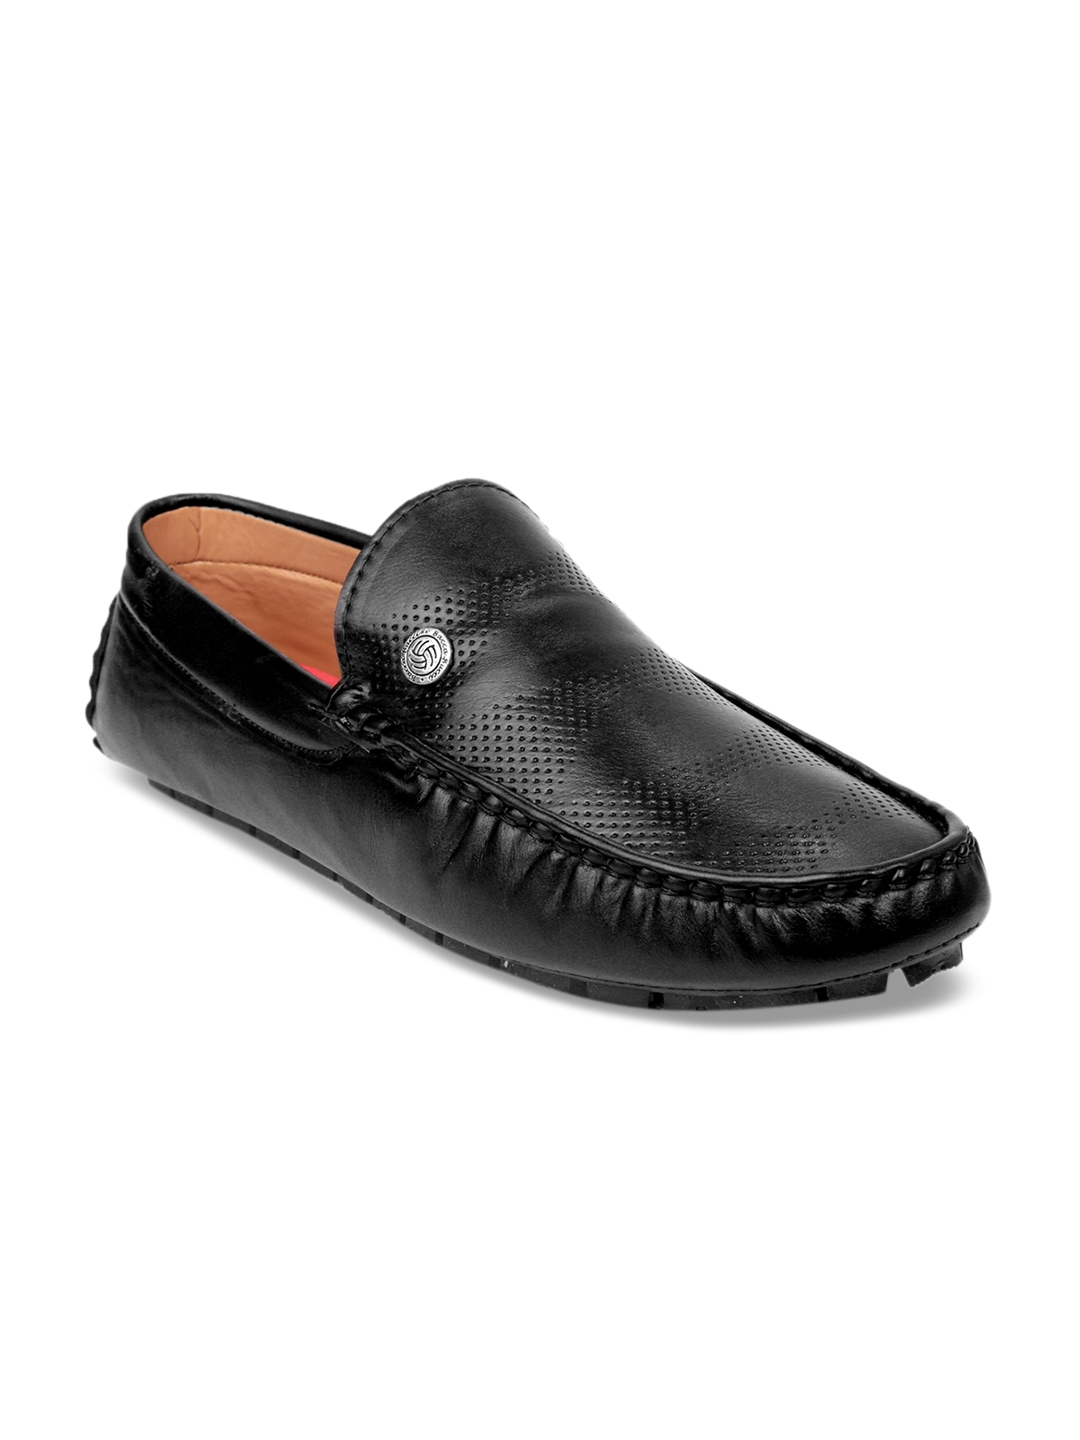 Buy Bacca Bucci Men Black Loafers - Casual Shoes for Men 8176125 | Myntra